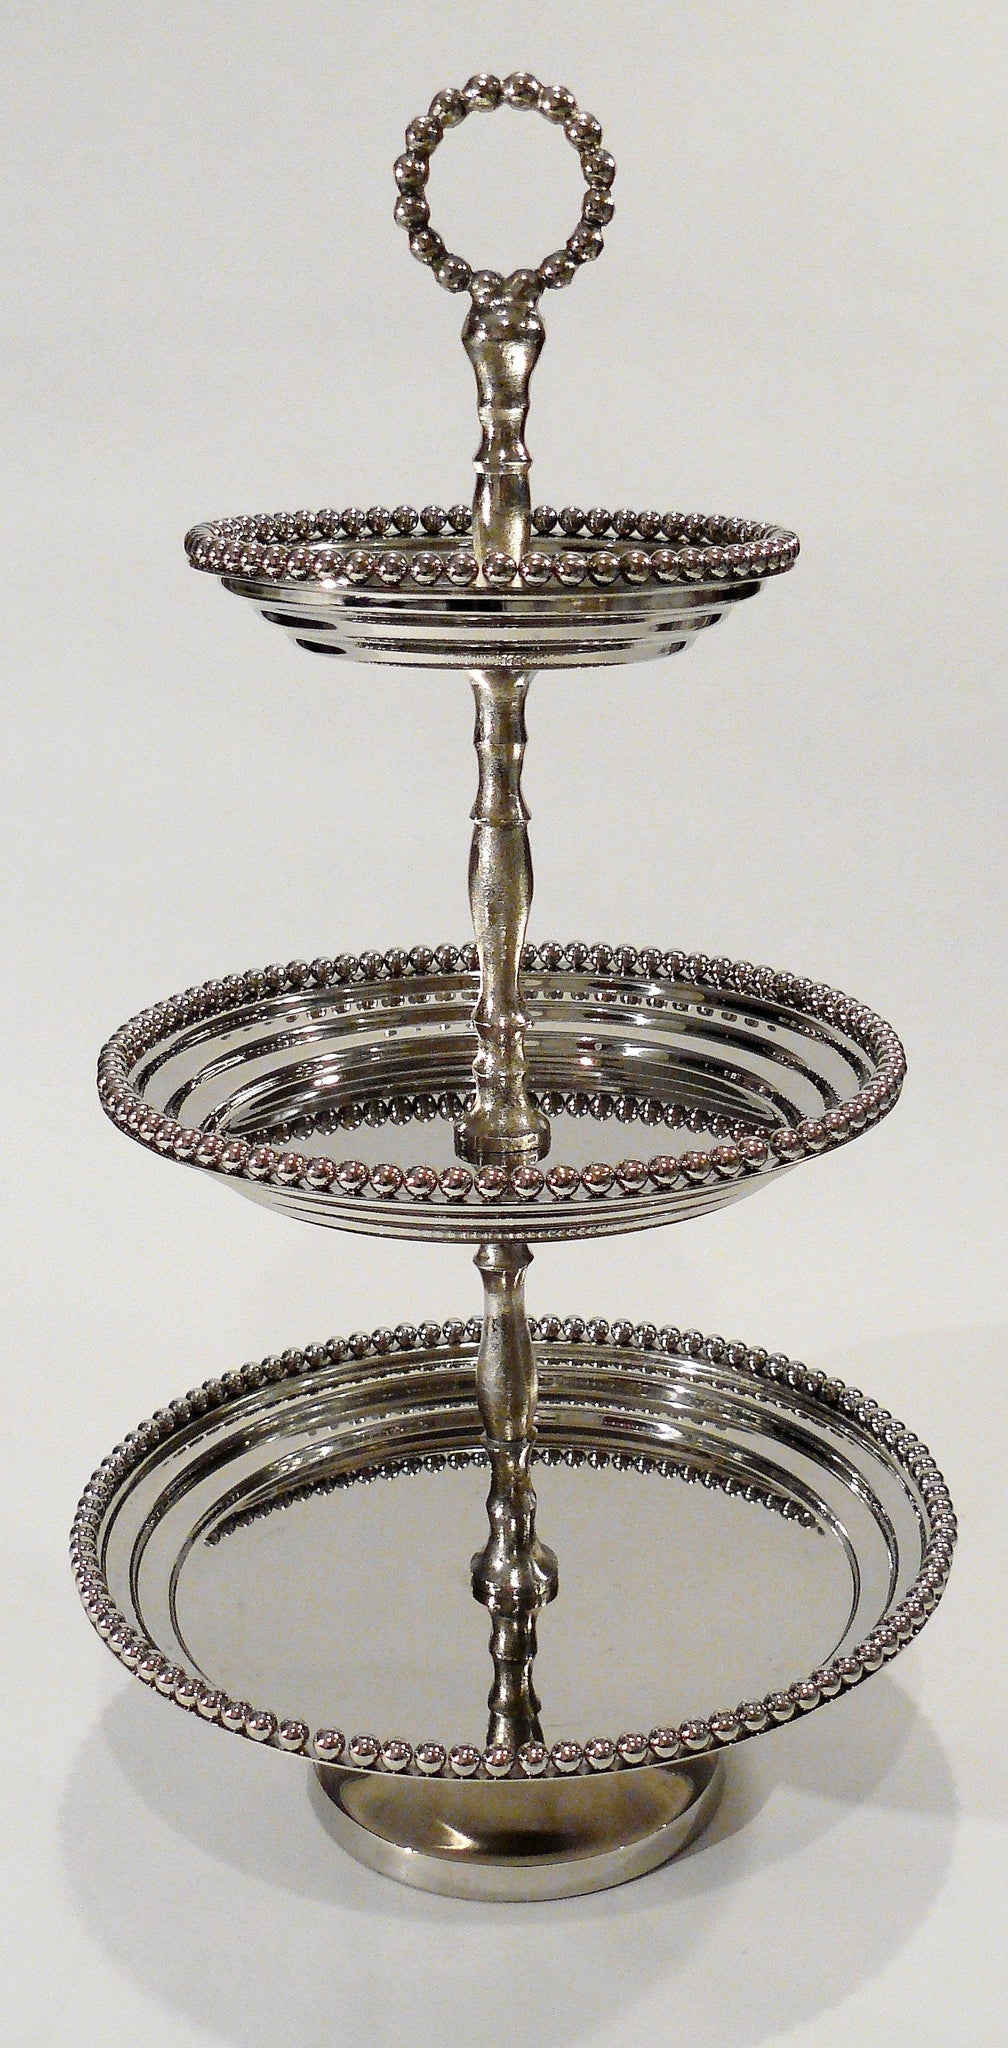 Large 3-Tier Silver-Plated Beaded Cake Stand perfect for your sweets table. Party rentals with Royal Table.